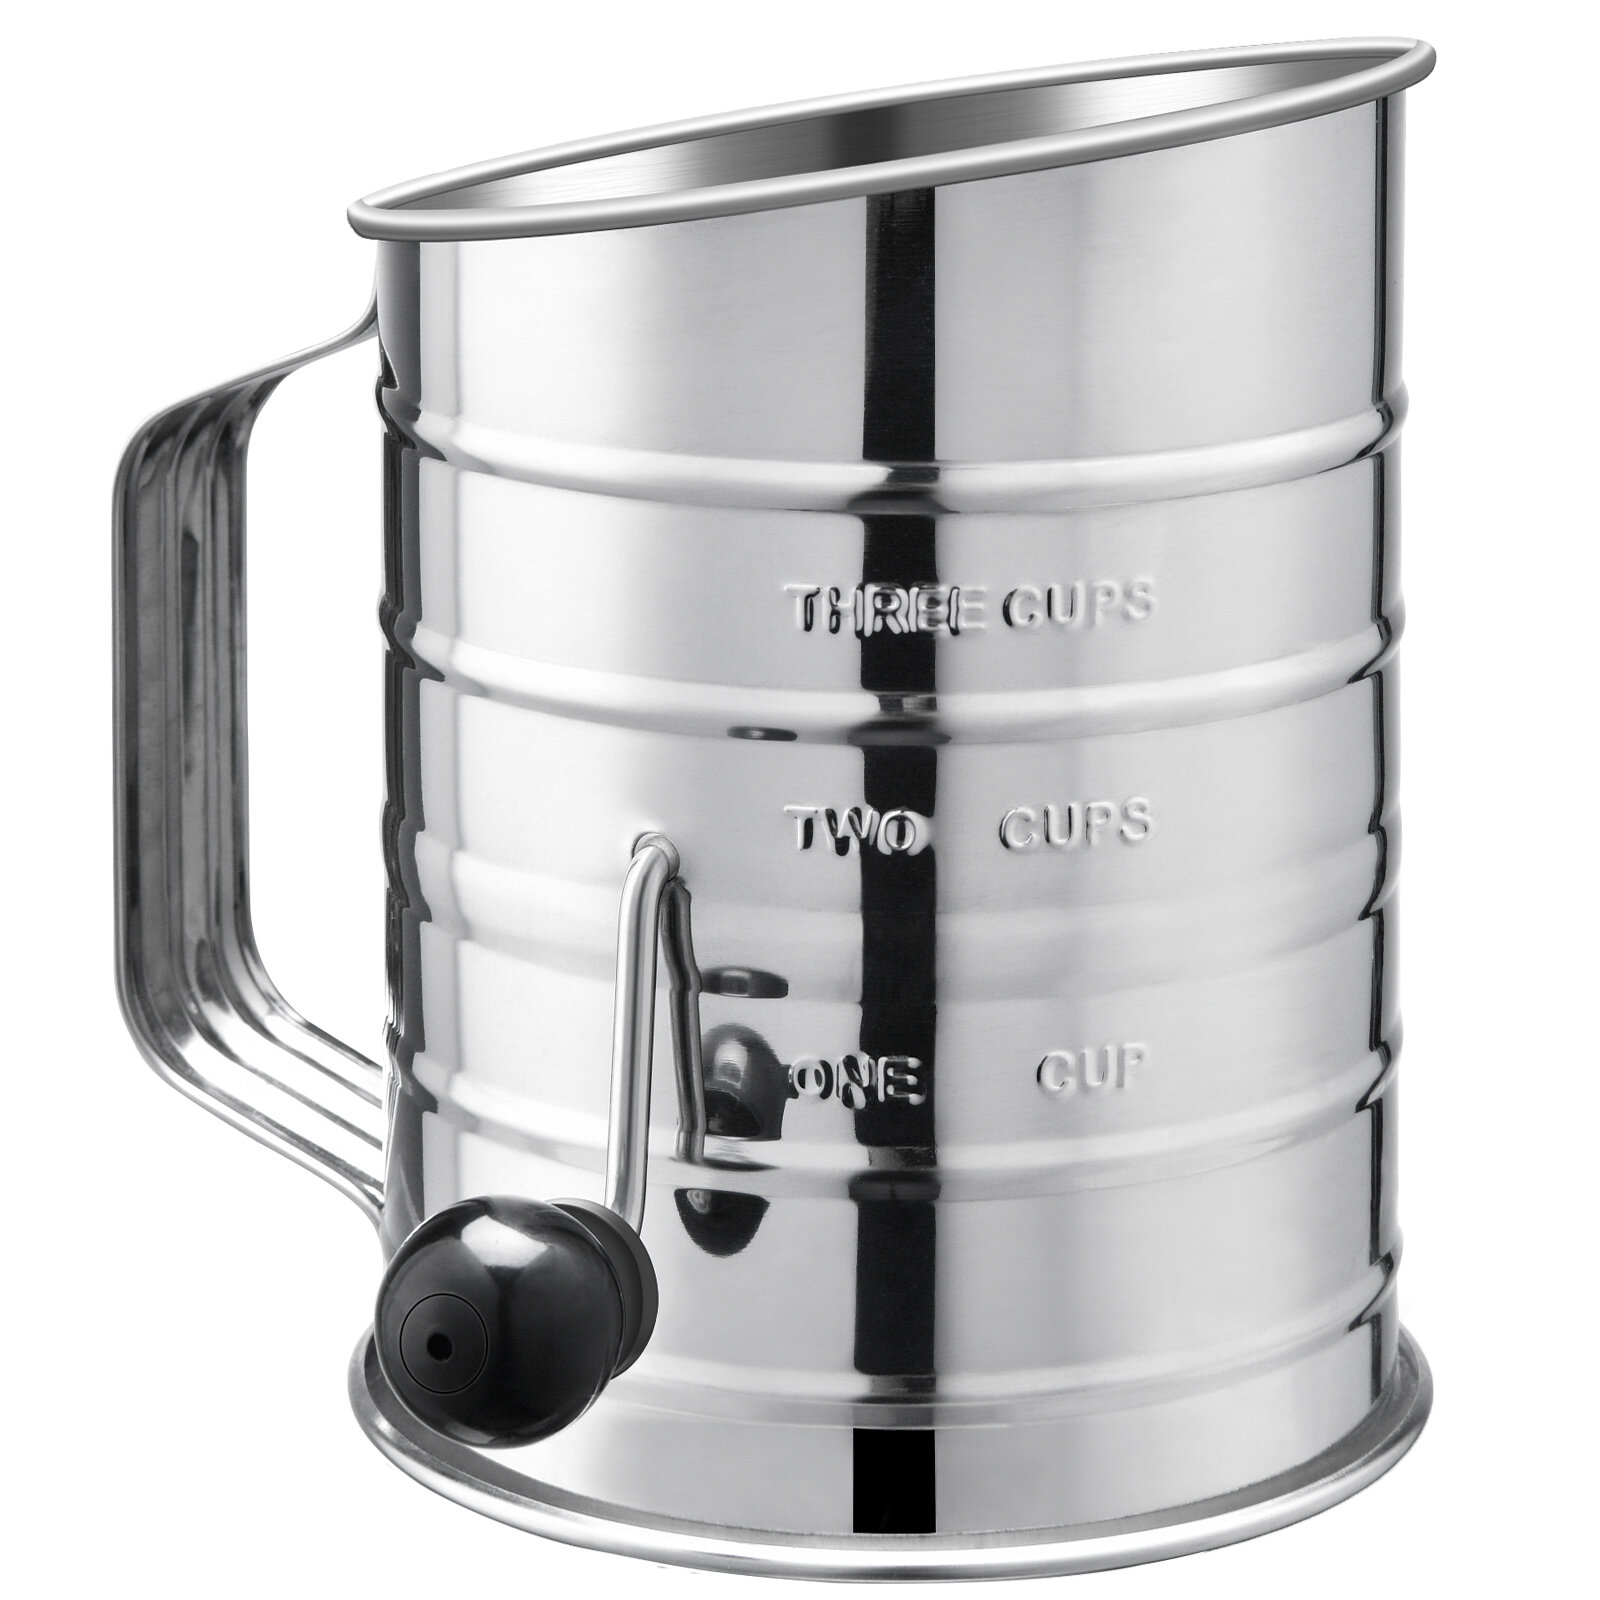 U-Taste Stainless Steel 3 Cup Flour Sifter with 4 Wire Agitators